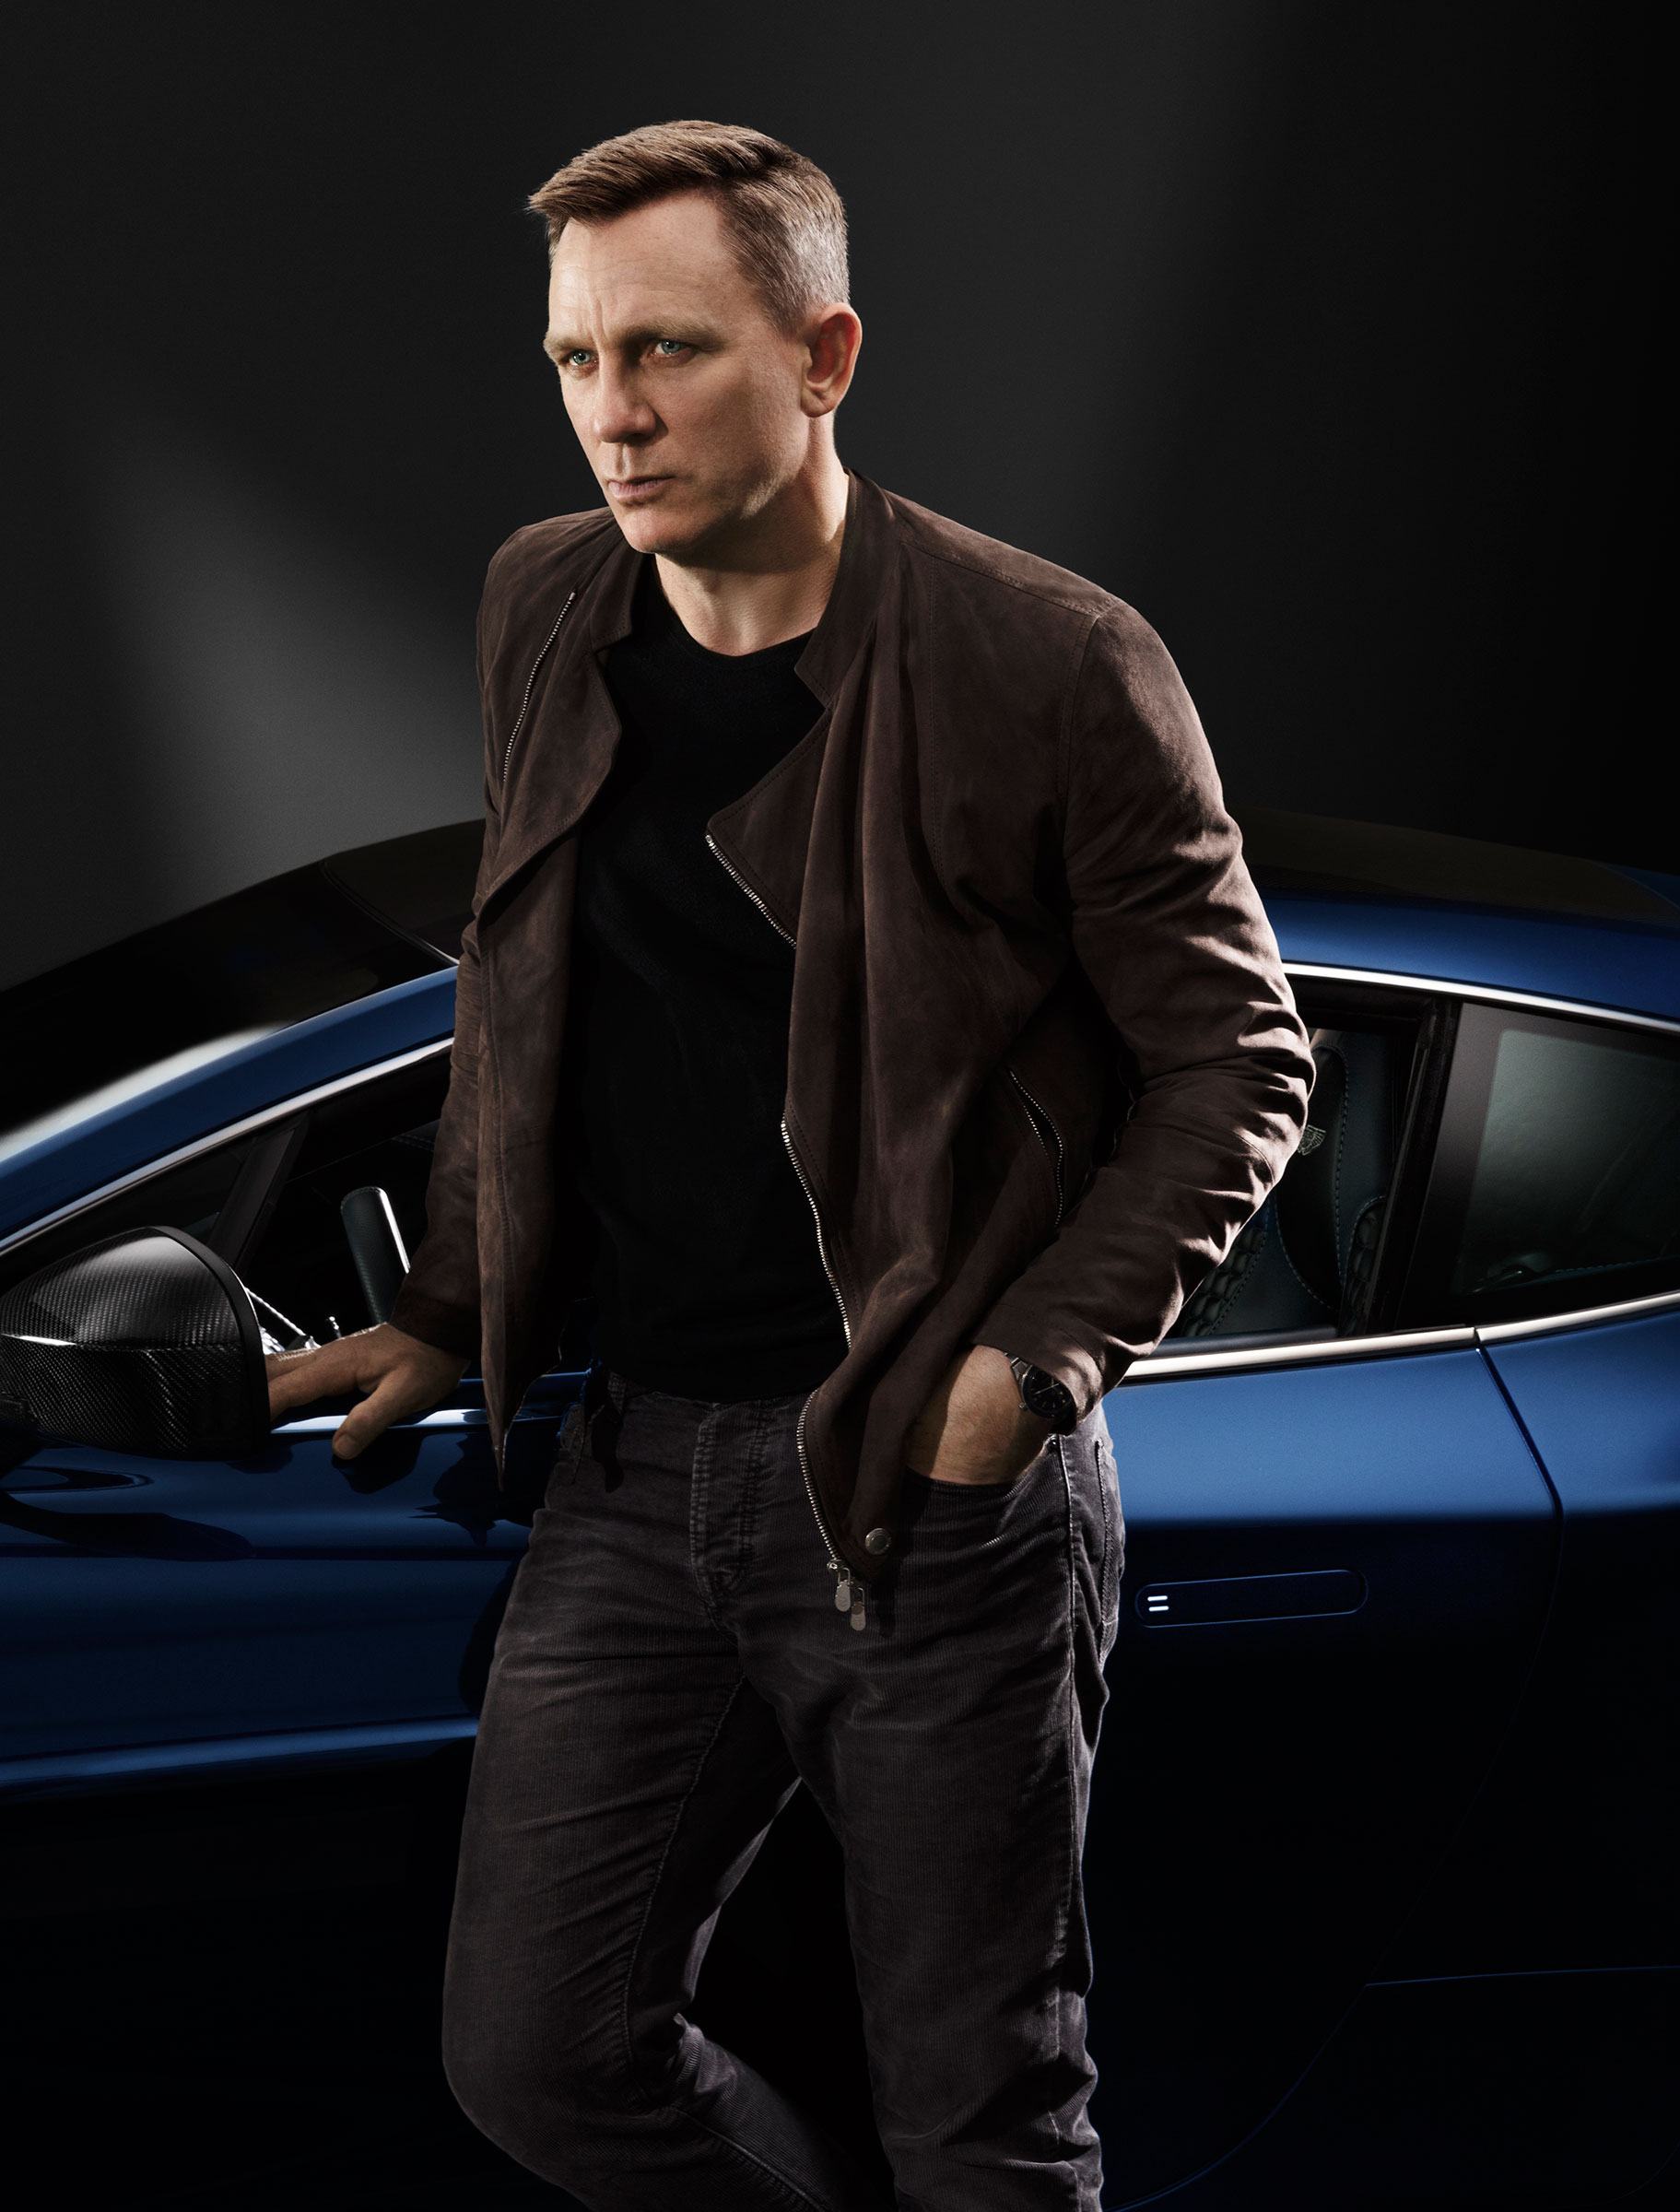 Daniel Craig's Aston Martin, numbered 007, sold at auction